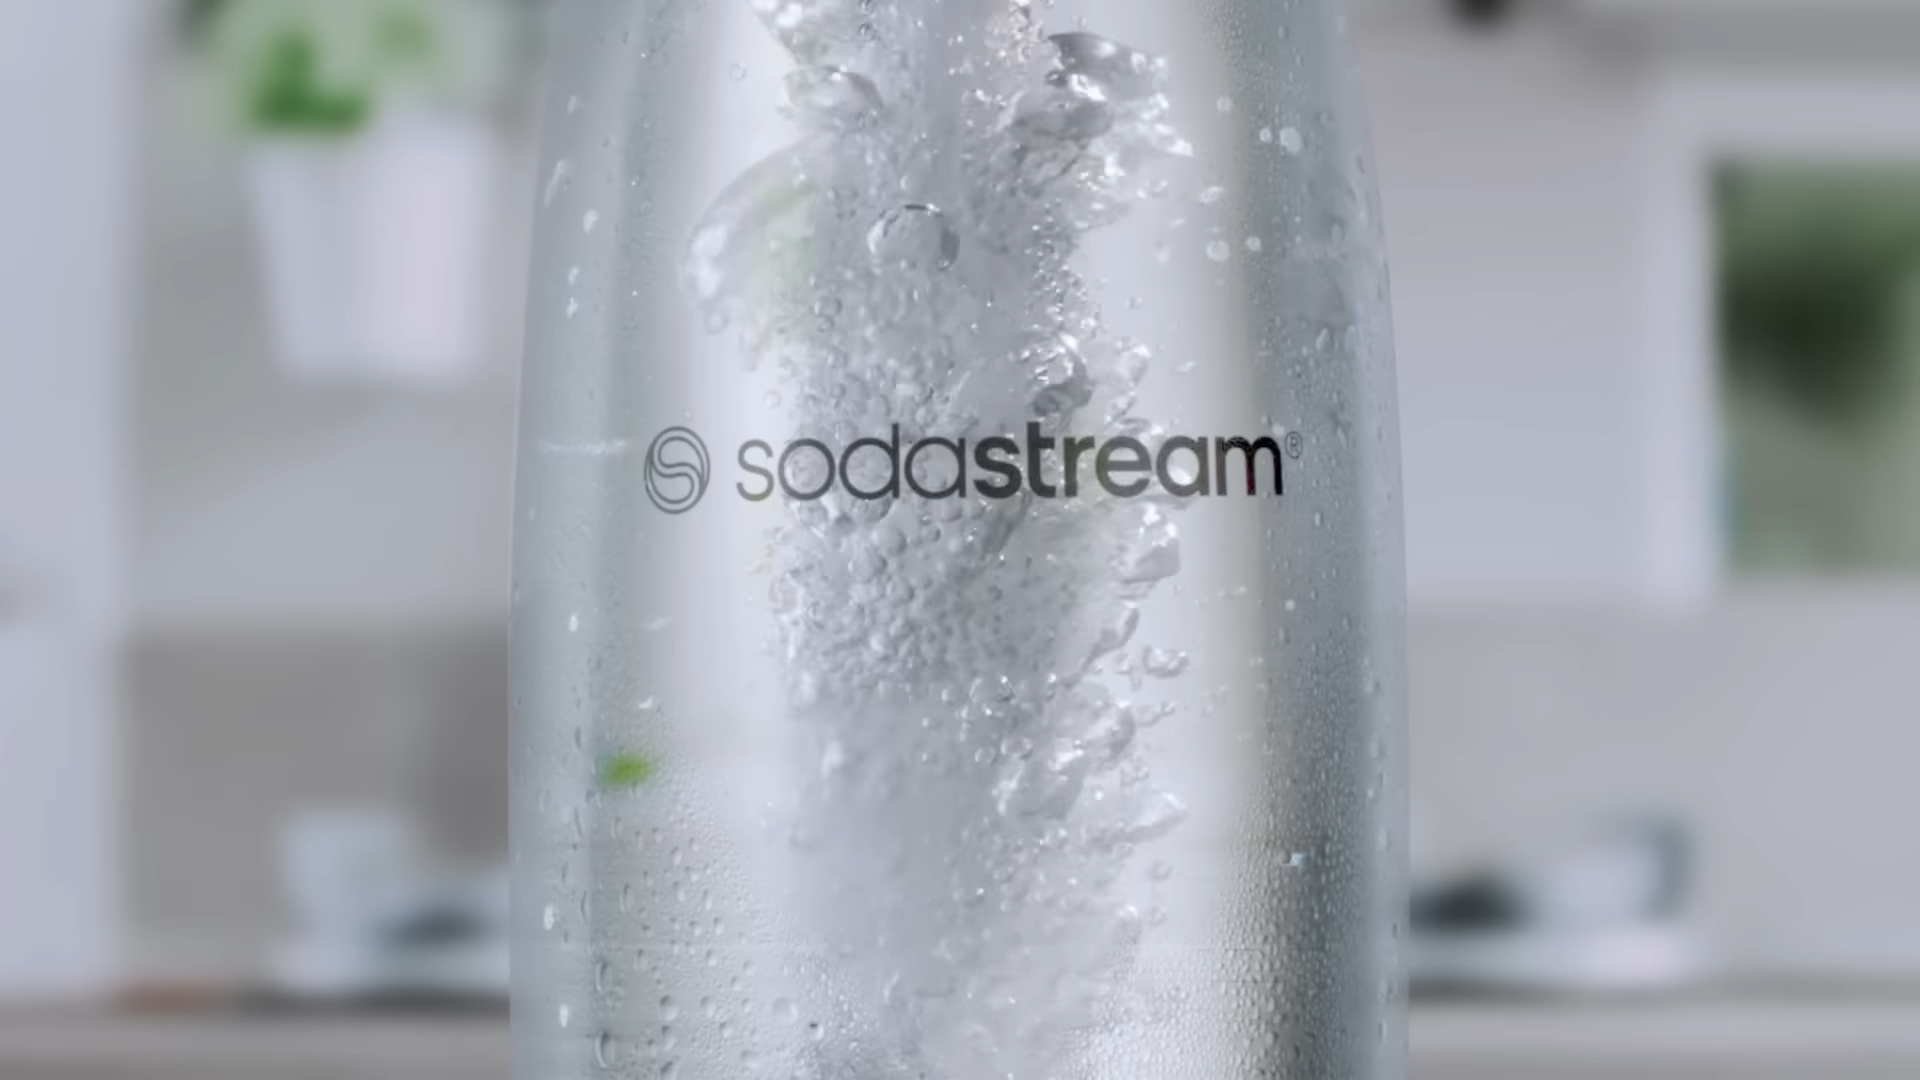 Cheaper Sodastream With A Big CO2 Tank Is A Semi-Dangerous Way To Save